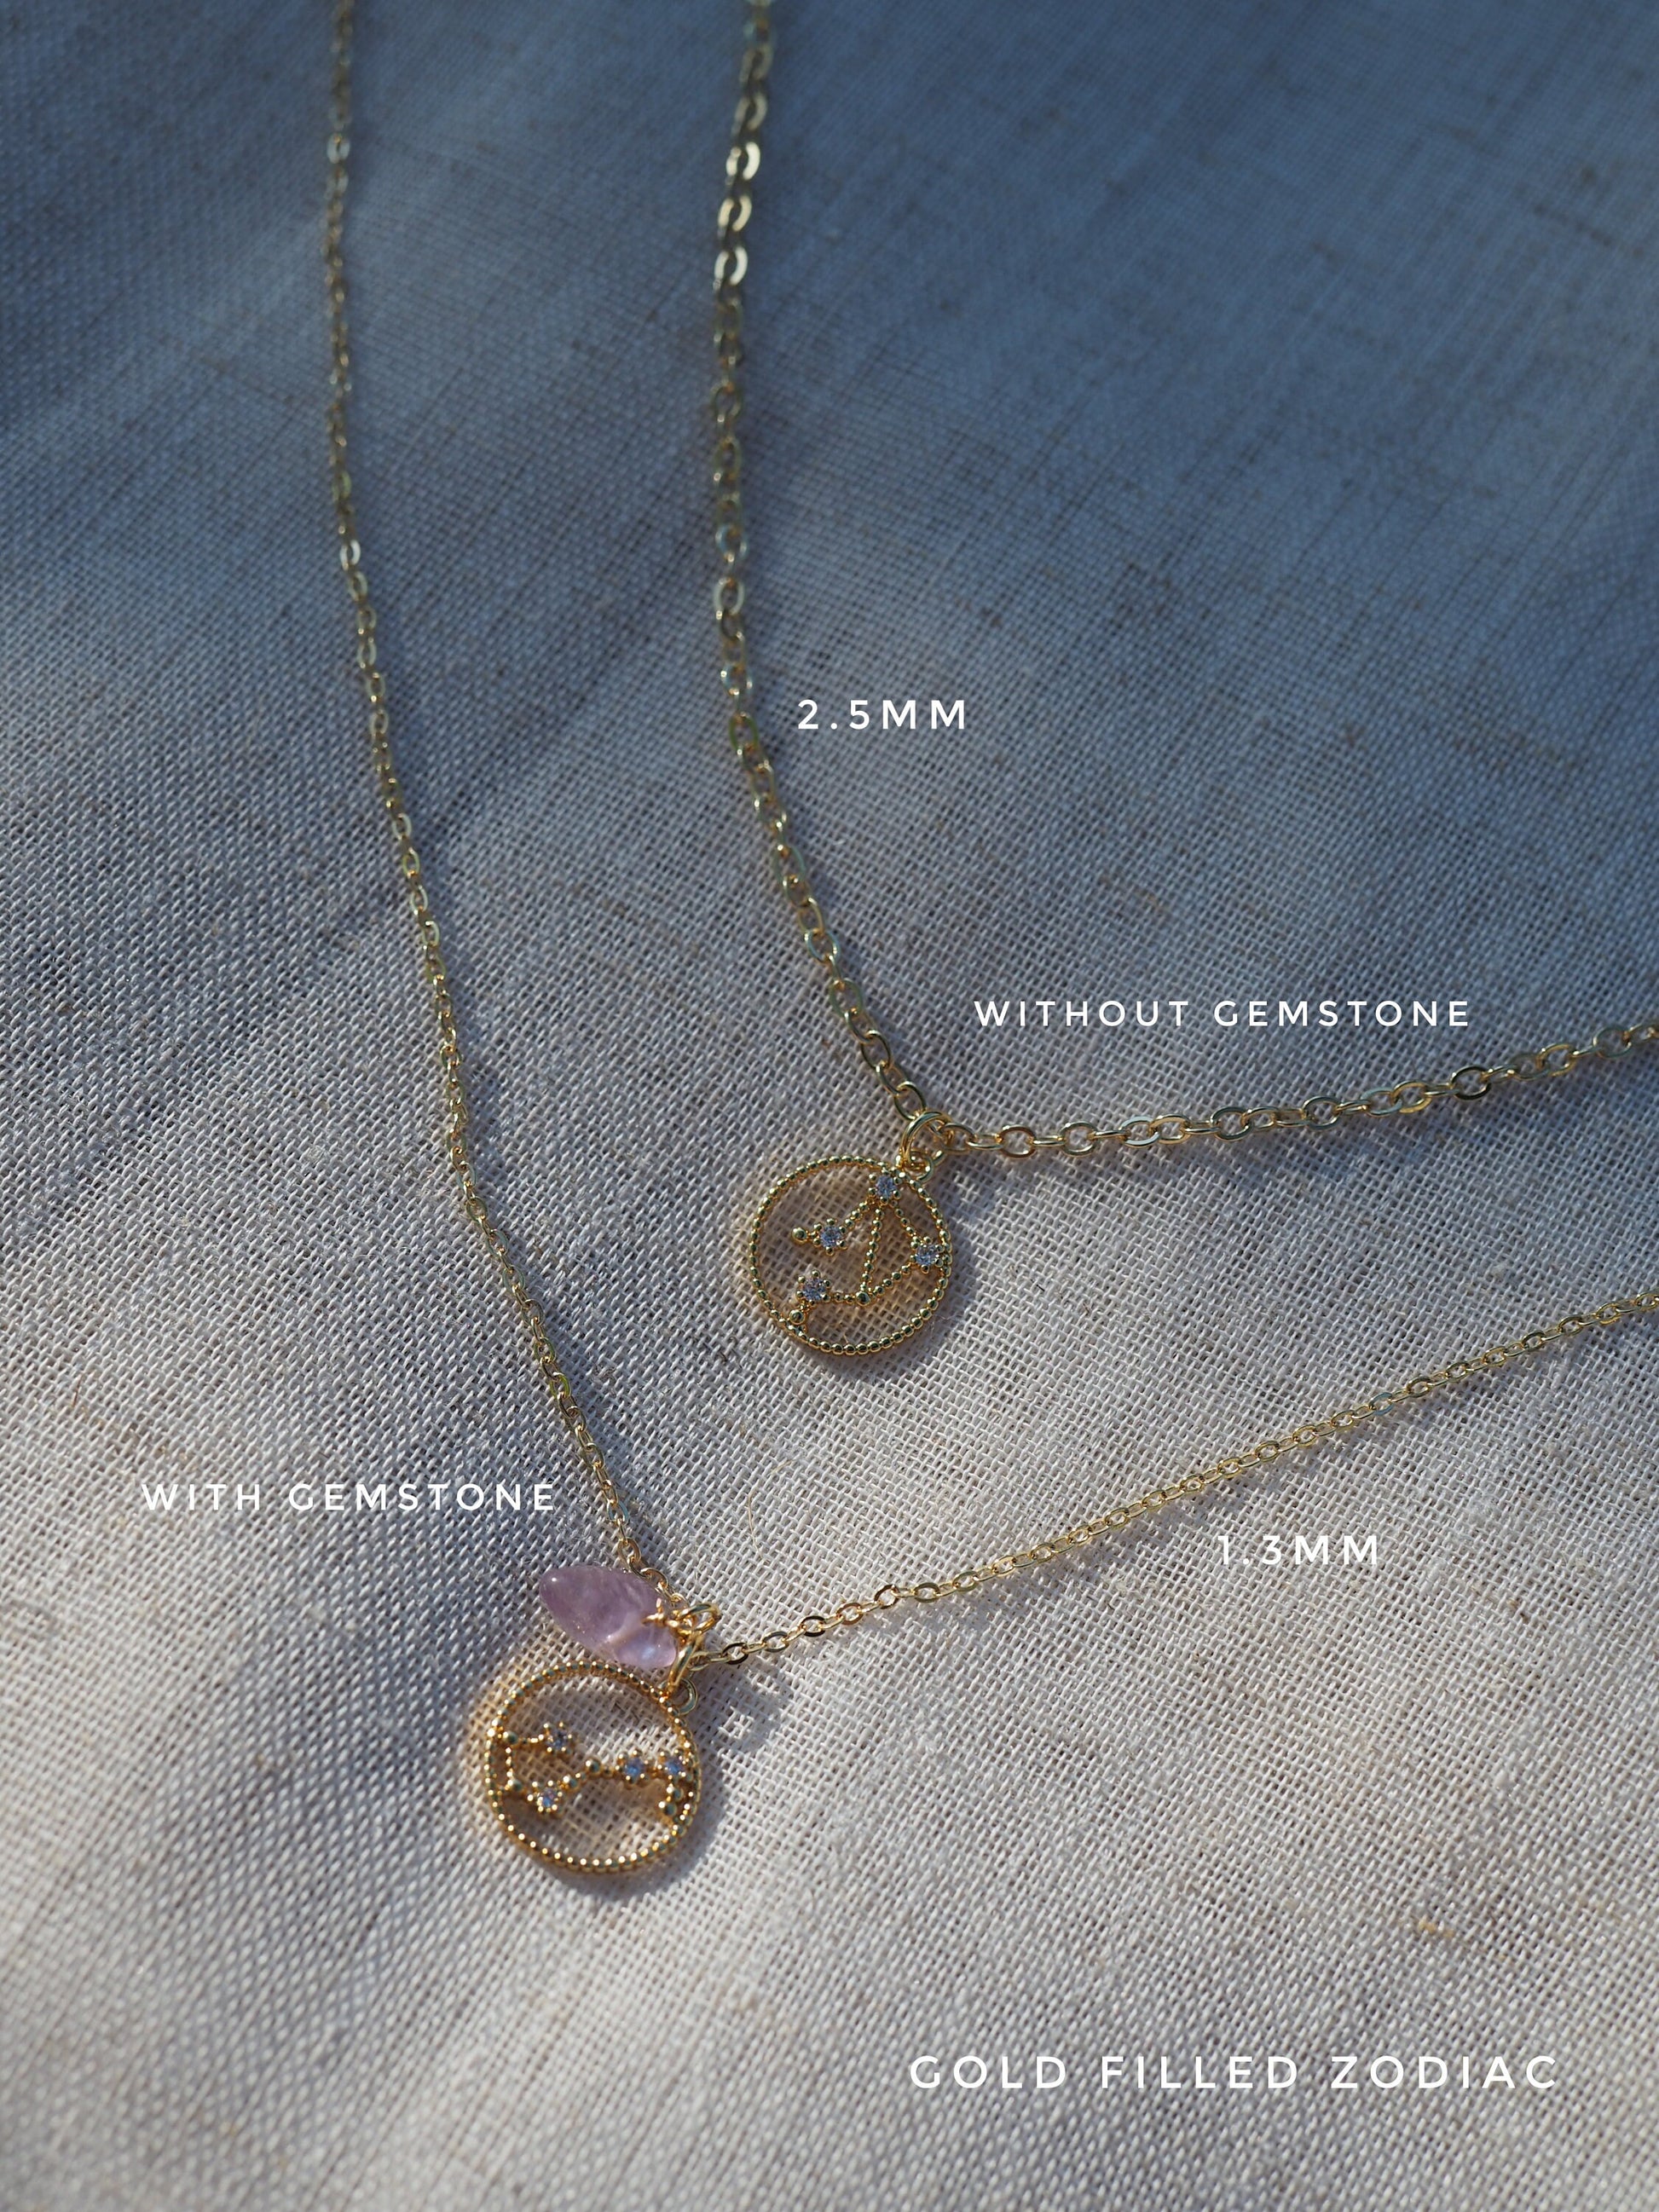 Gold filled Zodiac Necklace, Birthstone horoscope Necklace, Constellation Necklace Birth Sign, Christmas Gift Idea